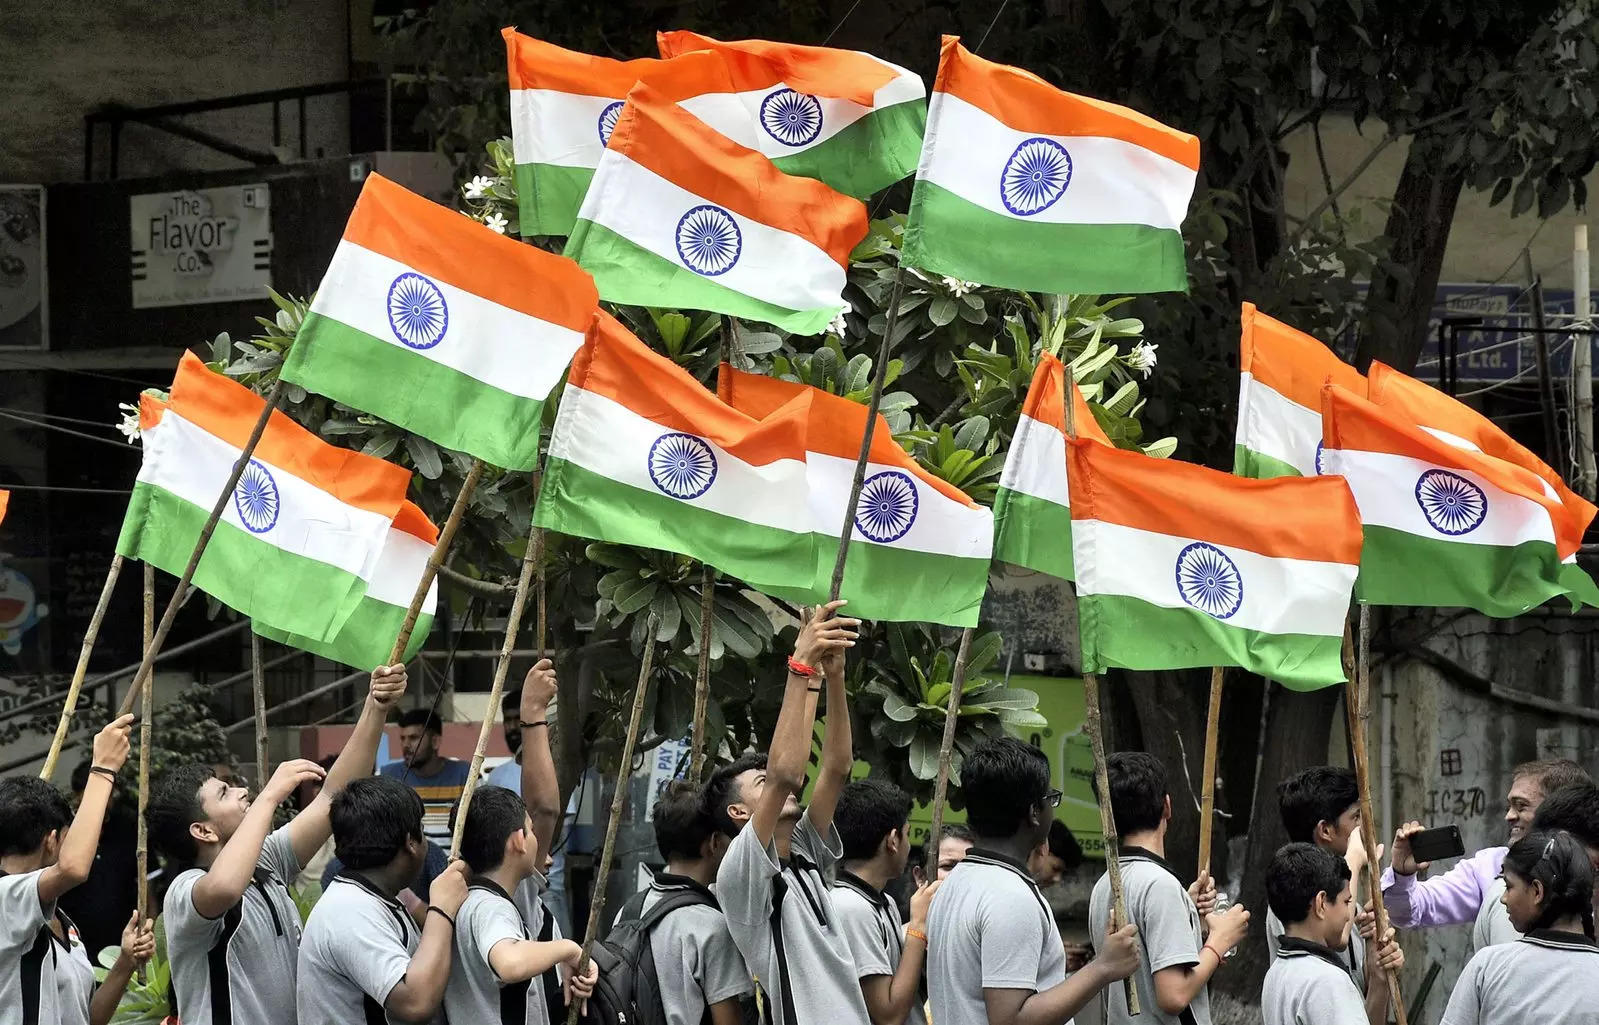 25 Lakh Flags 100 Programs Tricolor Music Program - Here's How the Delhi Government Plans to Celebrate 75th Independence Day